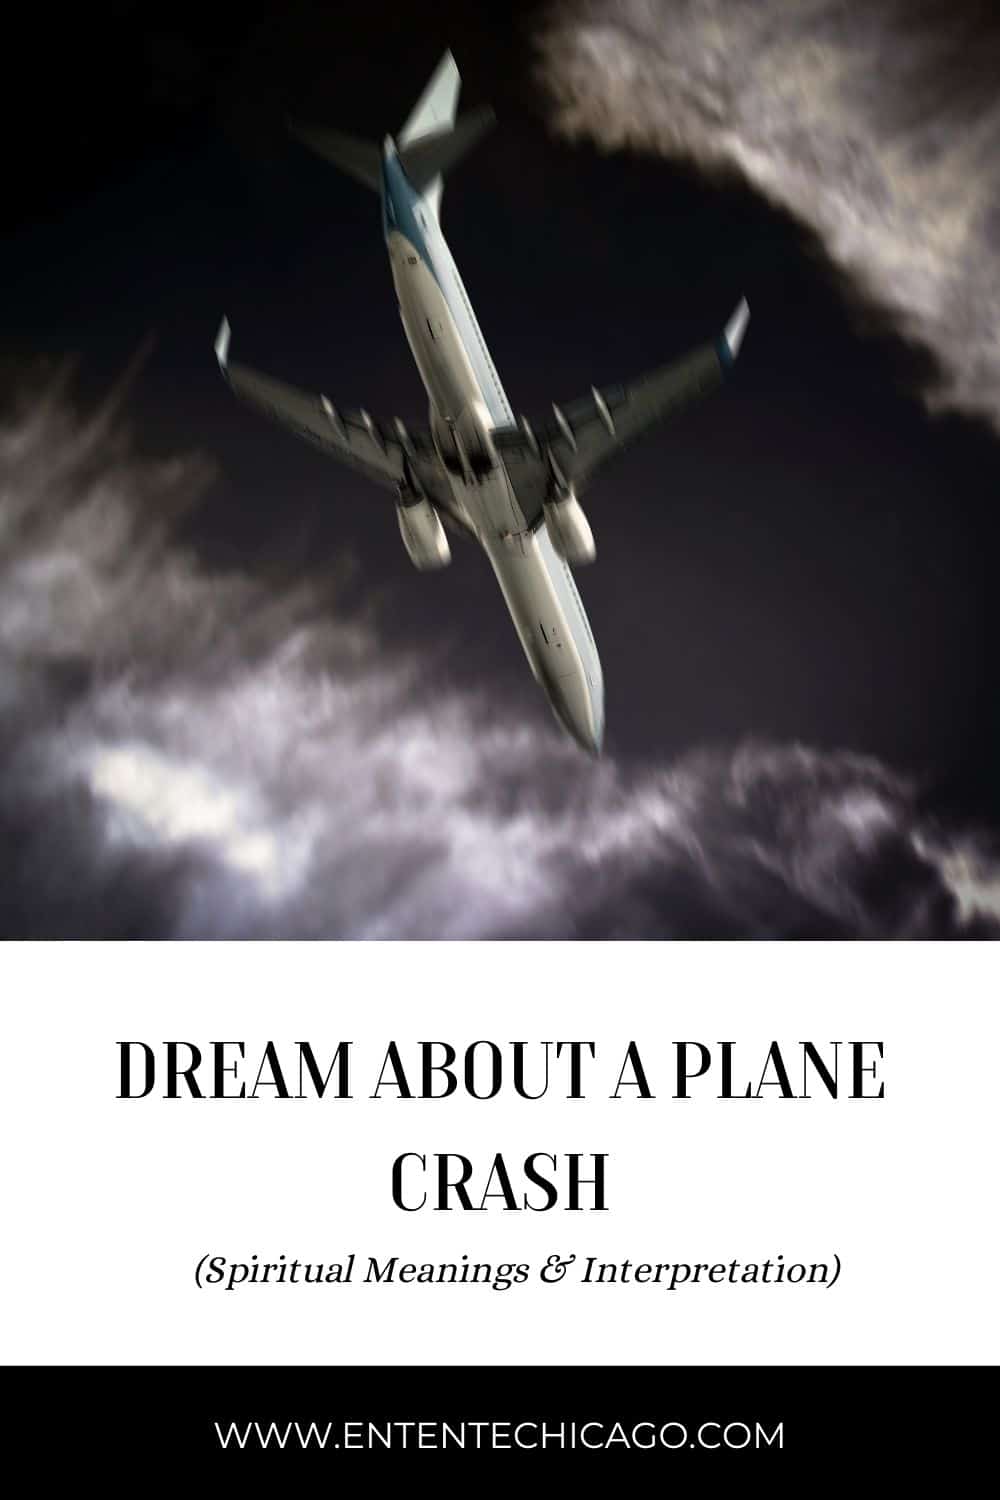 What Does It Mean to Dream About a Plane Crash